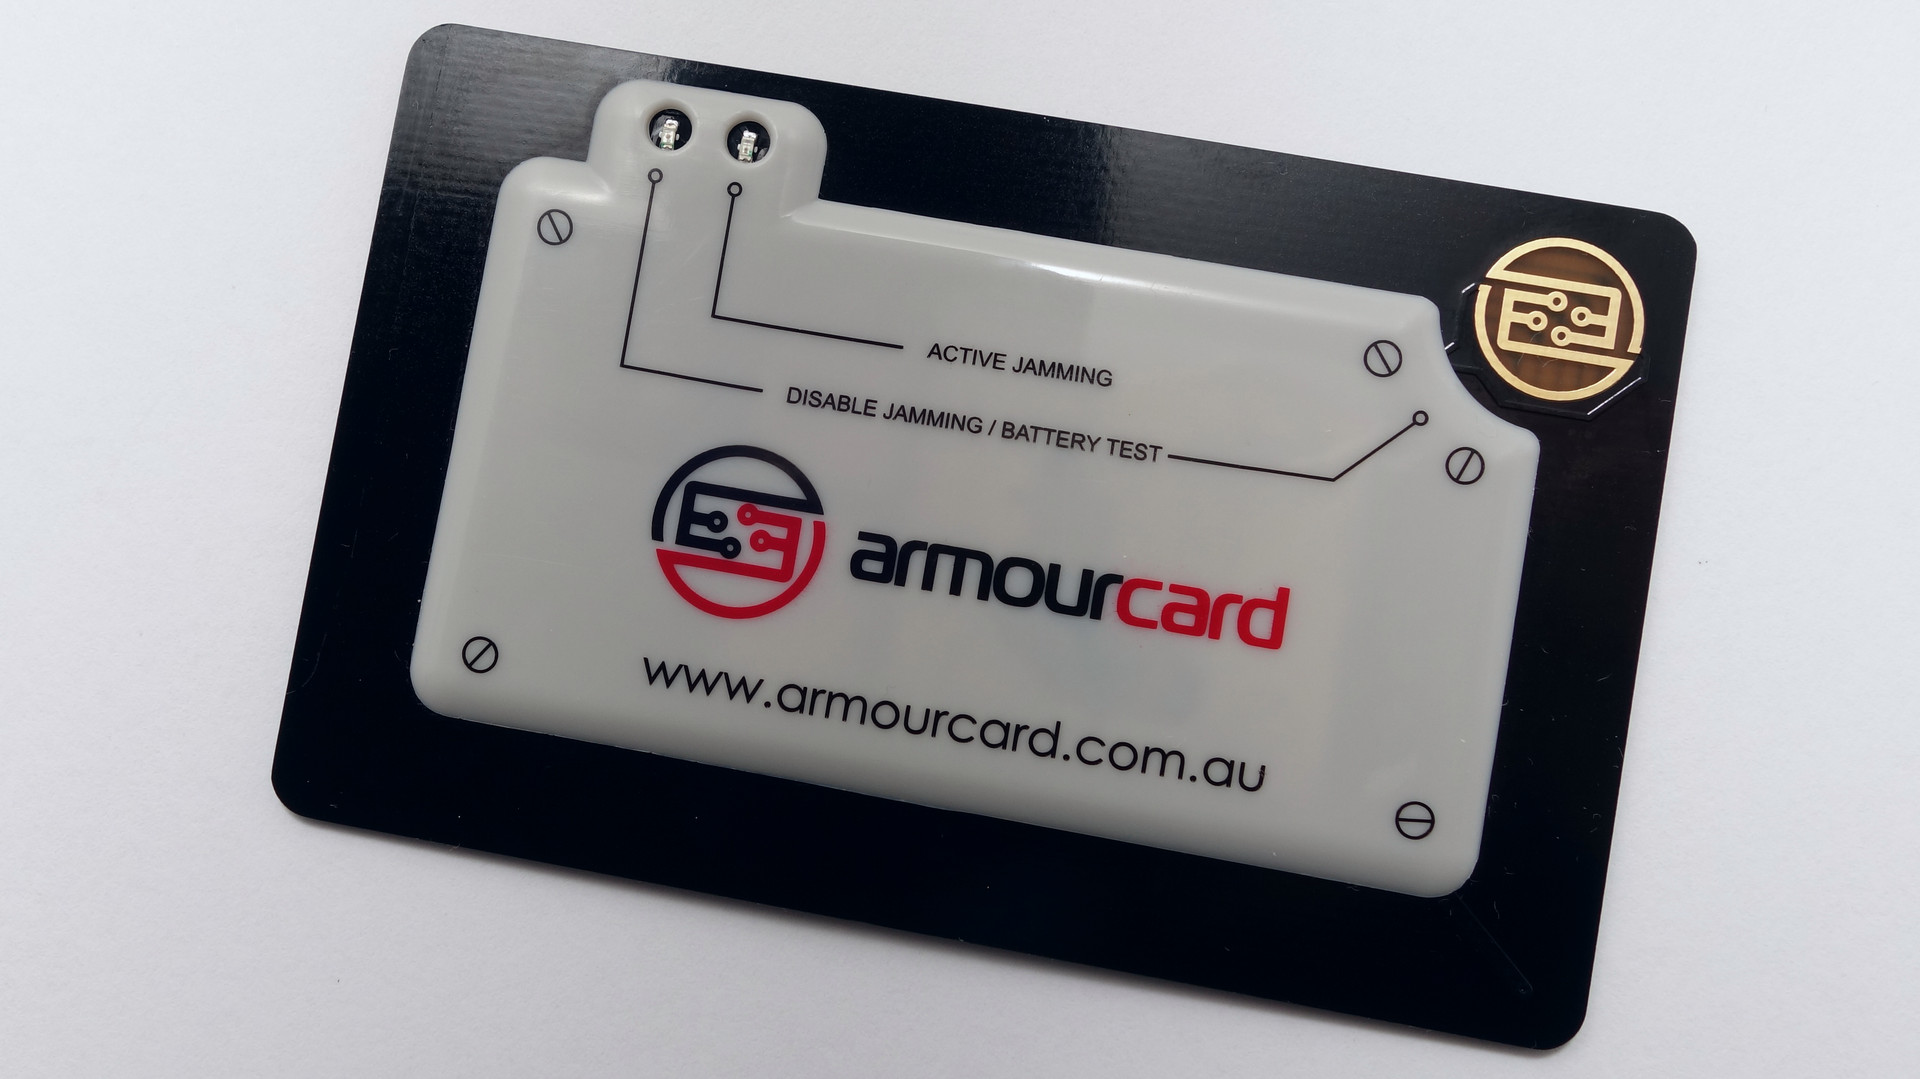 Front of the Armourcard